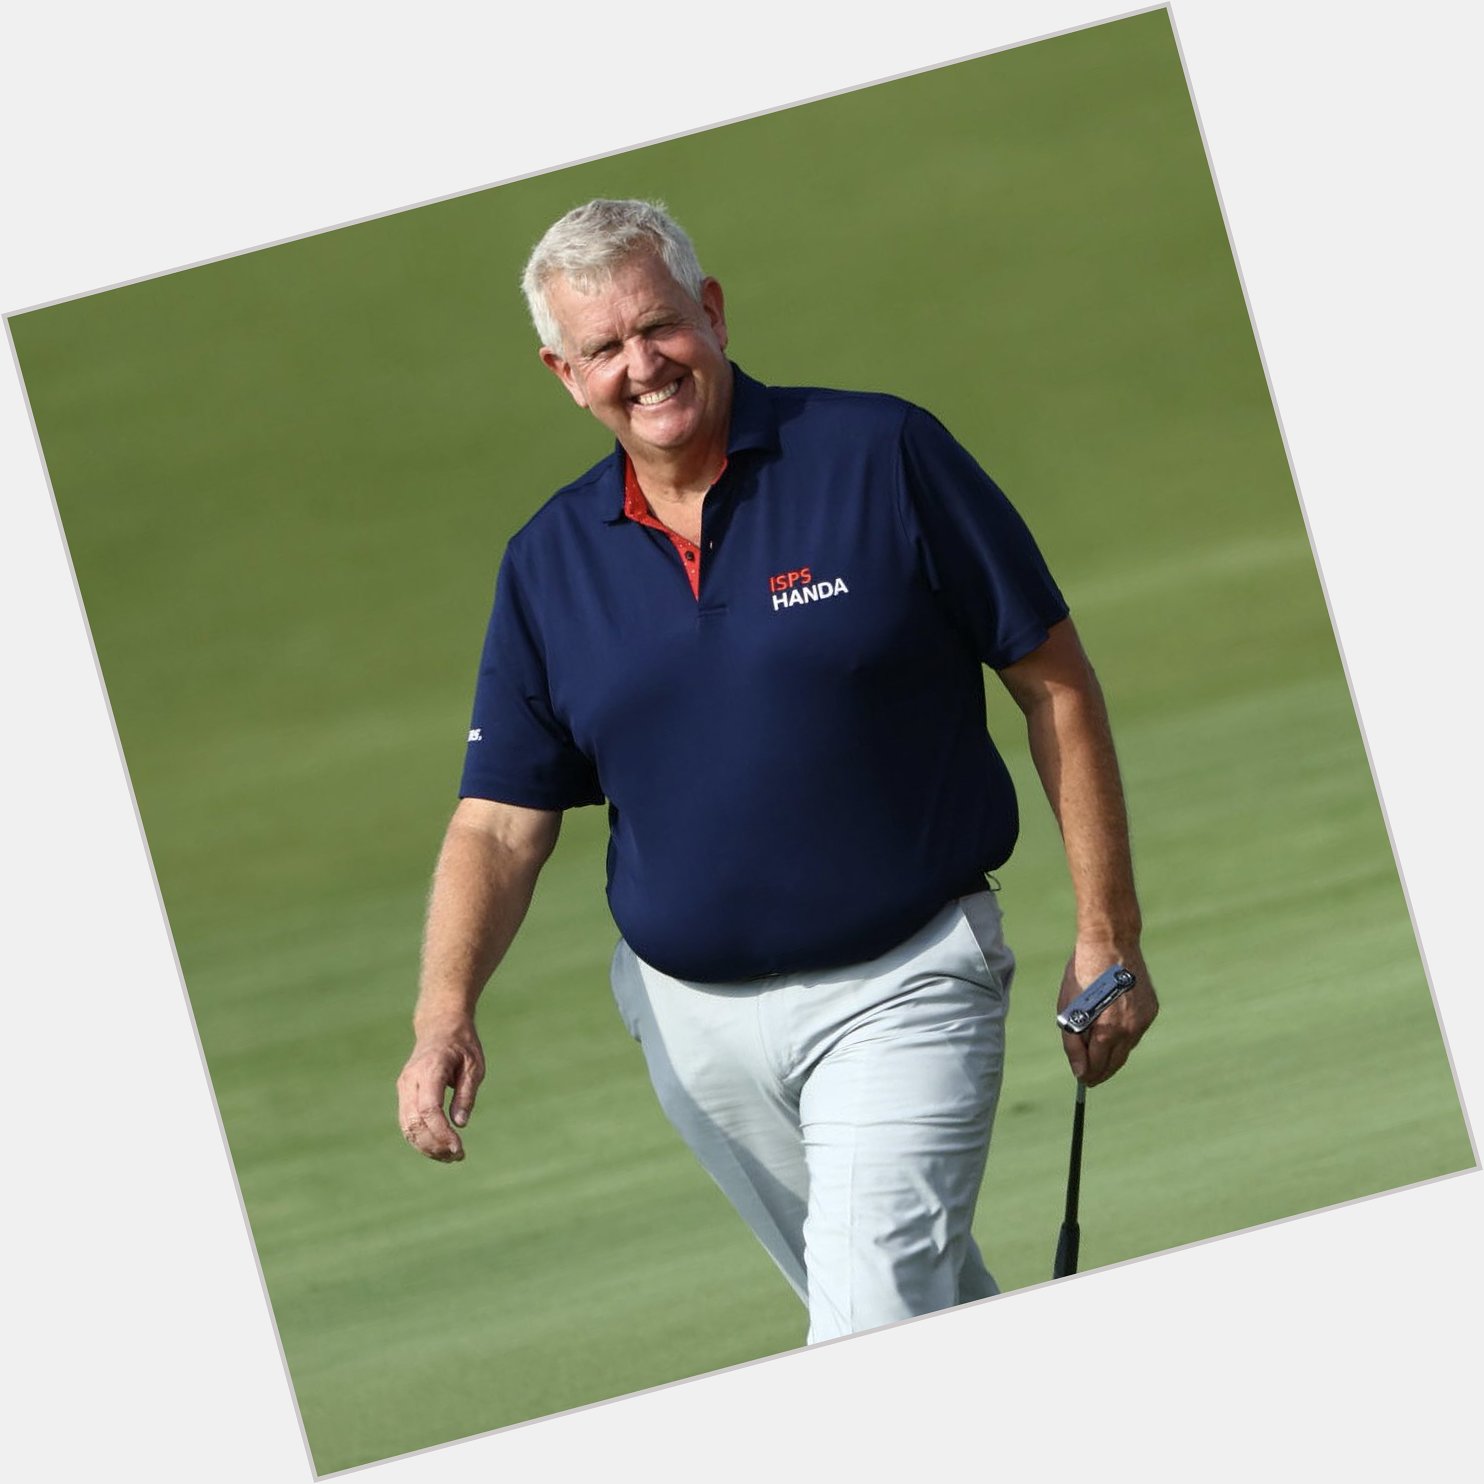 Wishing our ambassador Colin Montgomerie a very happy birthday! Hope you have an amazing day  